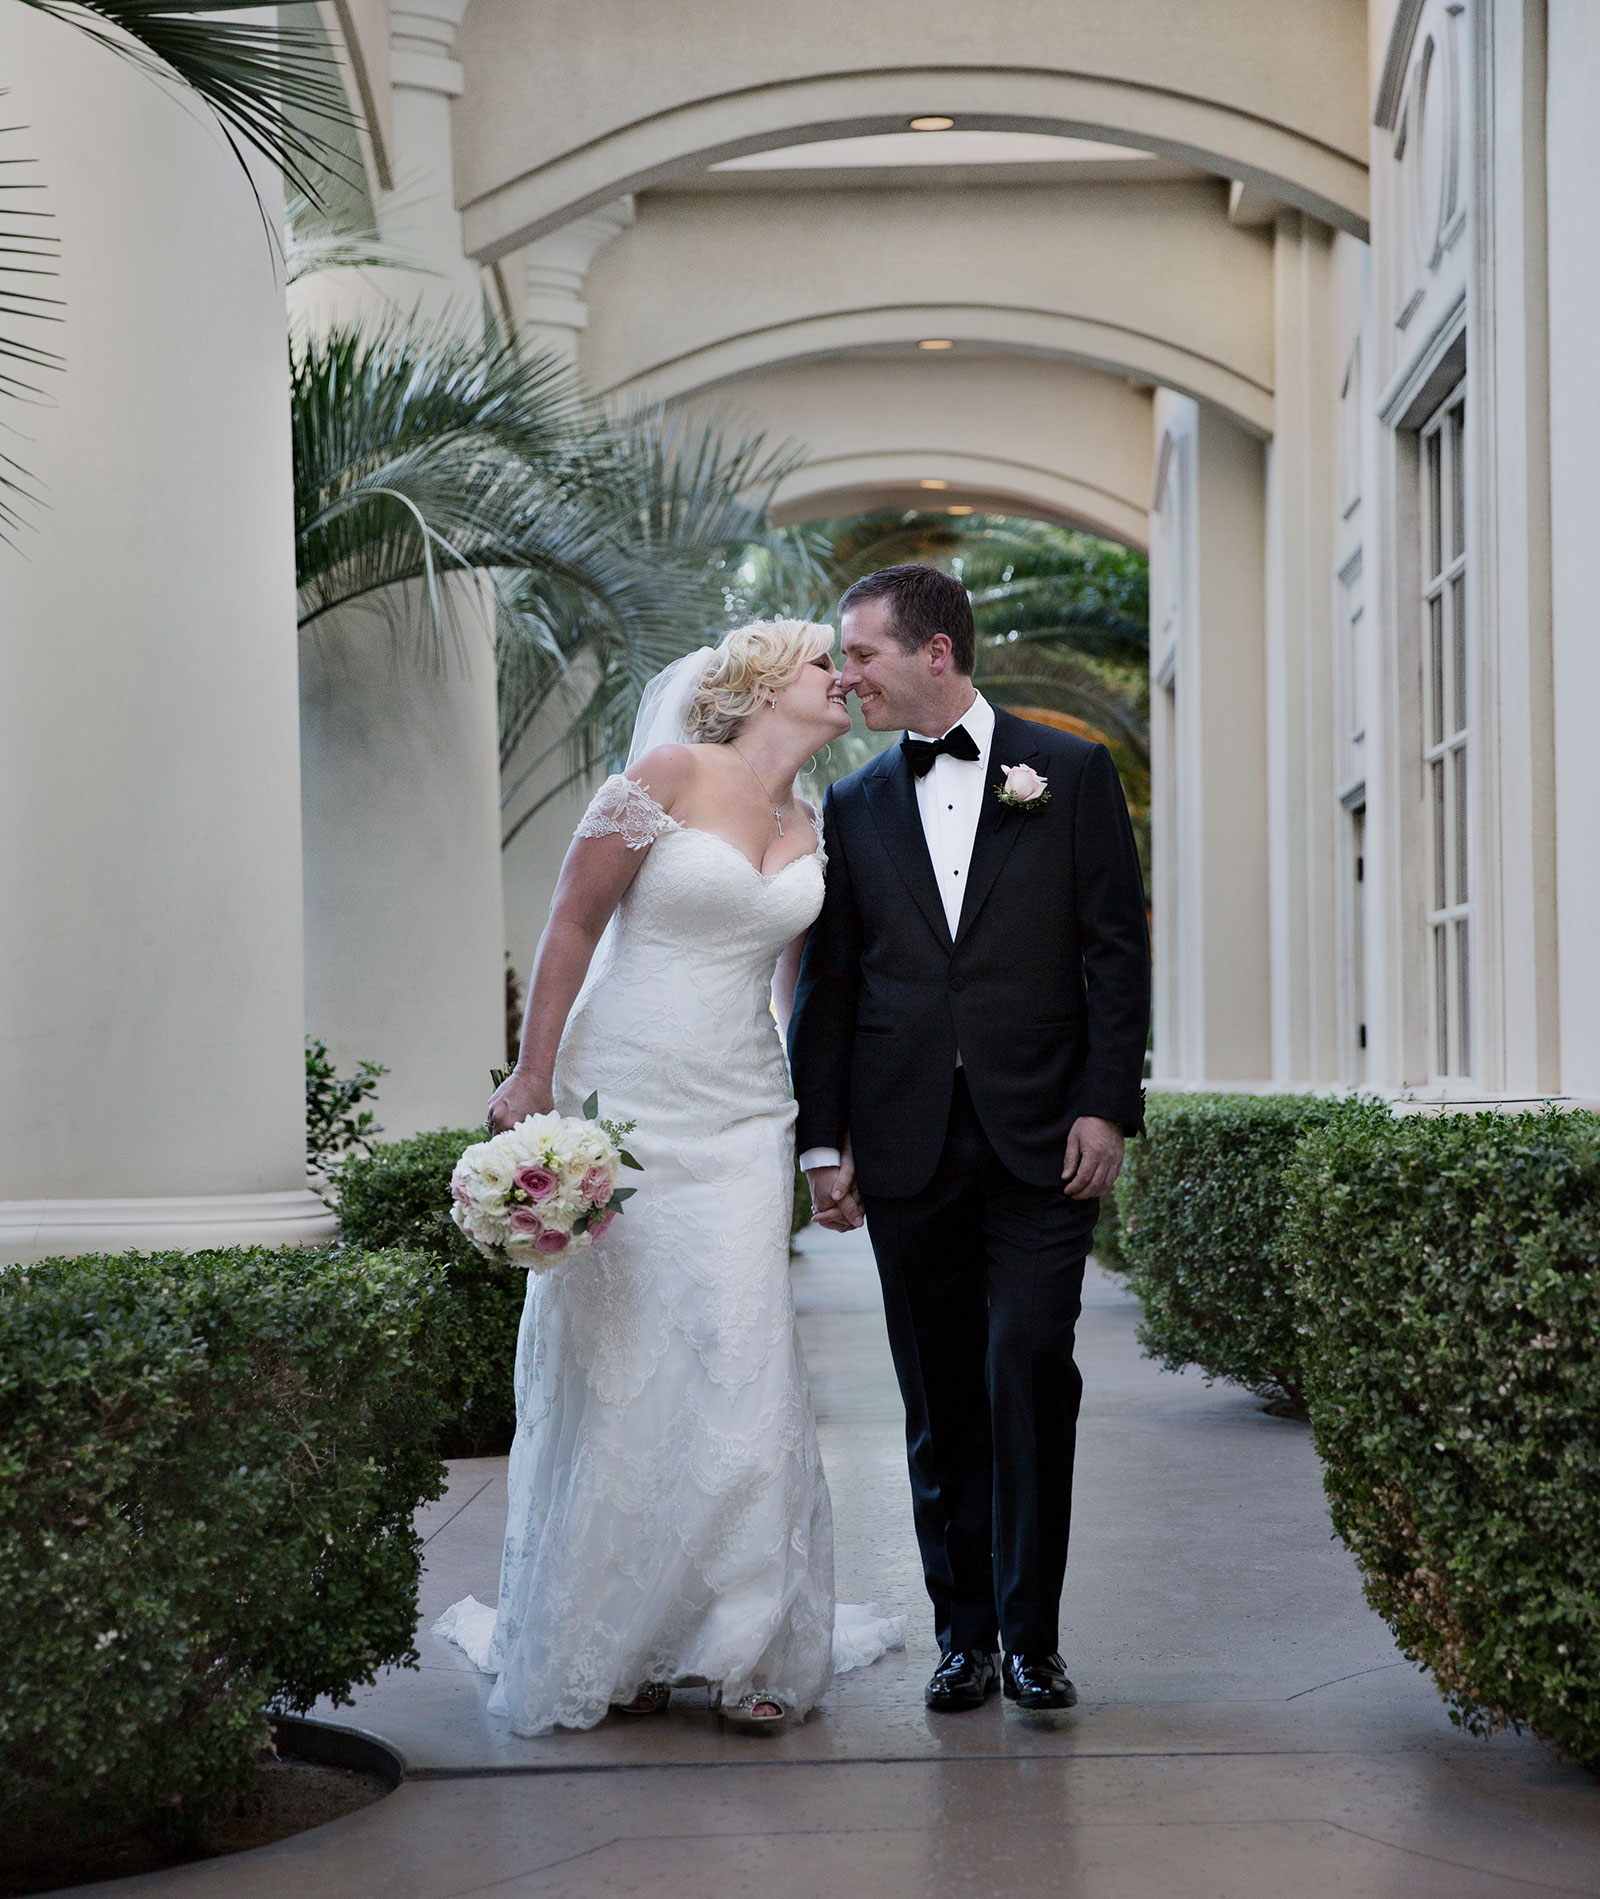 Michelle and Martin – Four Seasons